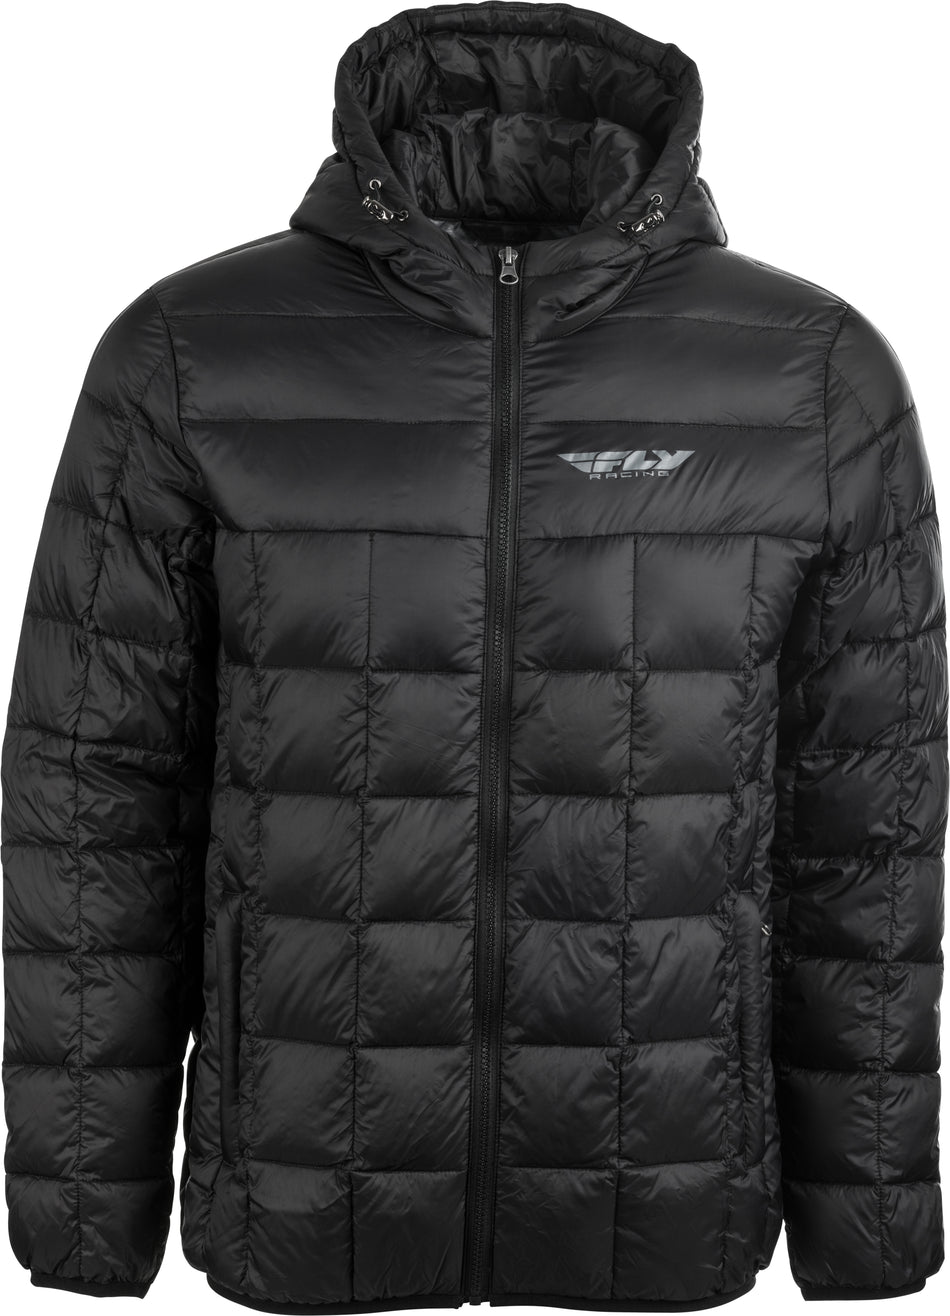 FLY RACING Fly Spark Down Jacket Black Xl 354-6180X